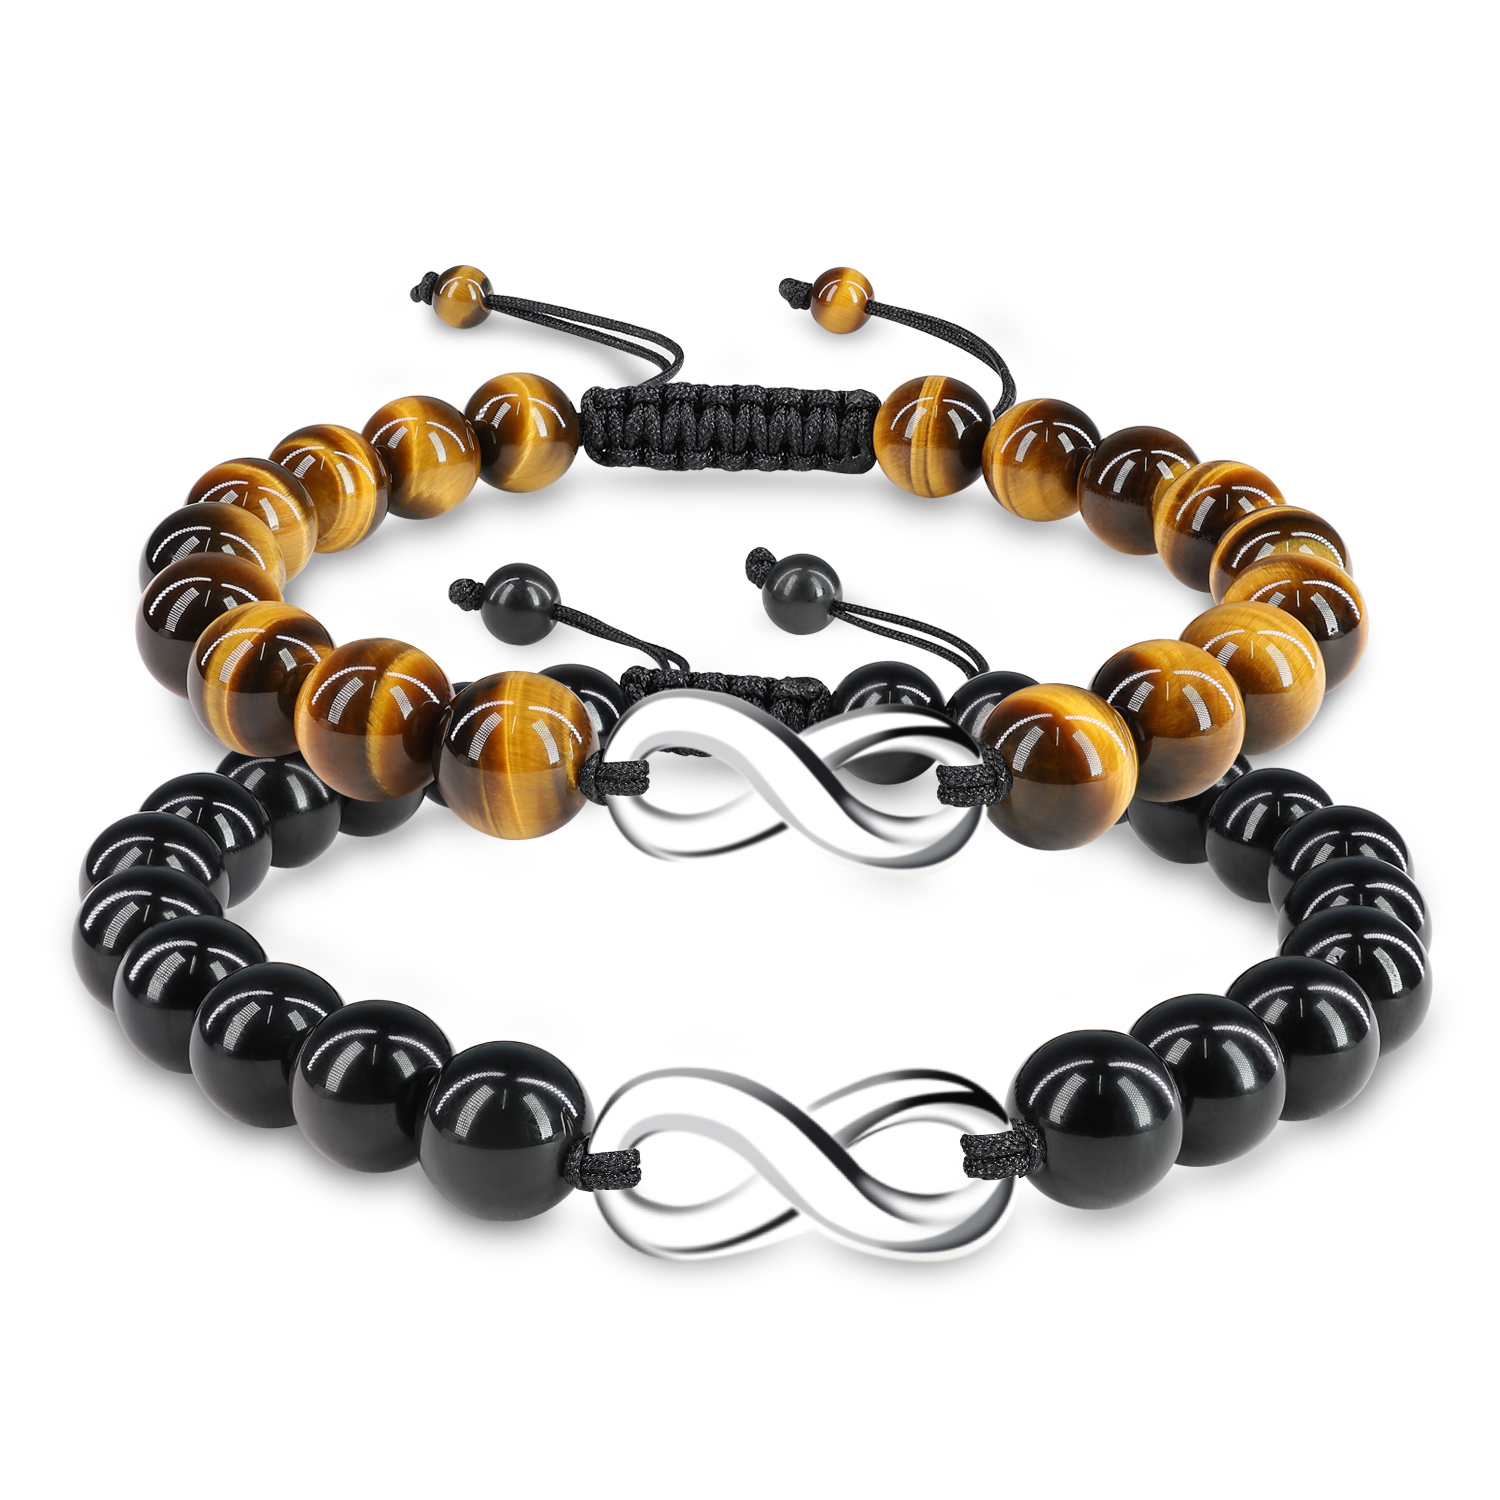 COAI-Obsidian-and-Tiger-eye-His-and-Hers-Infinity-Couples-Bracelets